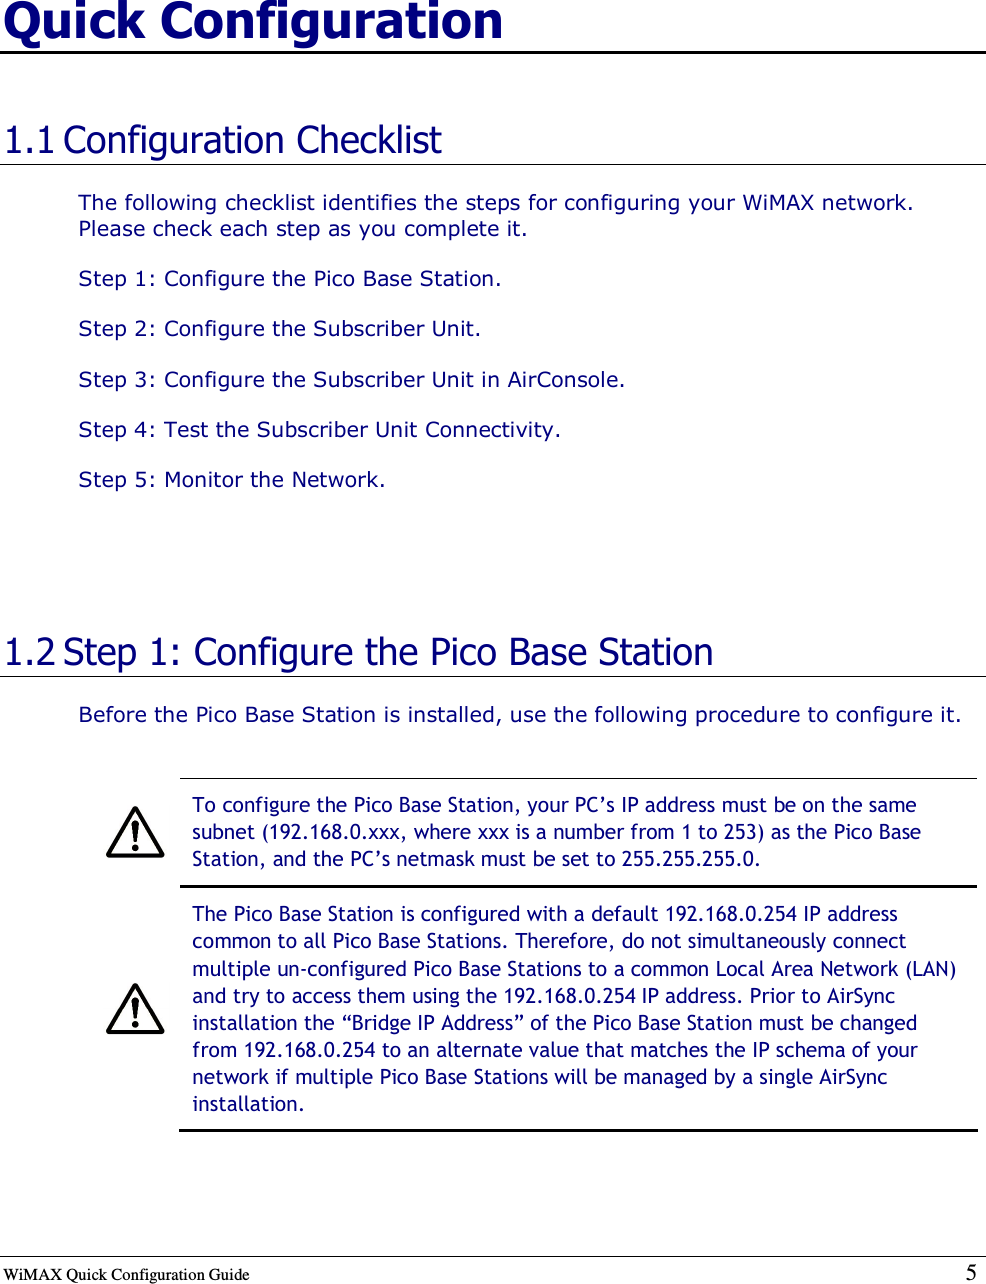  WiMAX Quick Configuration Guide   5    Quick Configuration 1.1 Configuration Checklist The following checklist identifies the steps for configuring your WiMAX network. Please check each step as you complete it. Step 1: Configure the Pico Base Station. Step 2: Configure the Subscriber Unit. Step 3: Configure the Subscriber Unit in AirConsole. Step 4: Test the Subscriber Unit Connectivity. Step 5: Monitor the Network.   1.2 Step 1: Configure the Pico Base Station Before the Pico Base Station is installed, use the following procedure to configure it.   To configure the Pico Base Station, your PC’s IP address must be on the same subnet (192.168.0.xxx, where xxx is a number from 1 to 253) as the Pico Base Station, and the PC’s netmask must be set to 255.255.255.0.  The Pico Base Station is configured with a default 192.168.0.254 IP address common to all Pico Base Stations. Therefore, do not simultaneously connect multiple un-configured Pico Base Stations to a common Local Area Network (LAN) and try to access them using the 192.168.0.254 IP address. Prior to AirSync installation the “Bridge IP Address” of the Pico Base Station must be changed from 192.168.0.254 to an alternate value that matches the IP schema of your network if multiple Pico Base Stations will be managed by a single AirSync installation.  